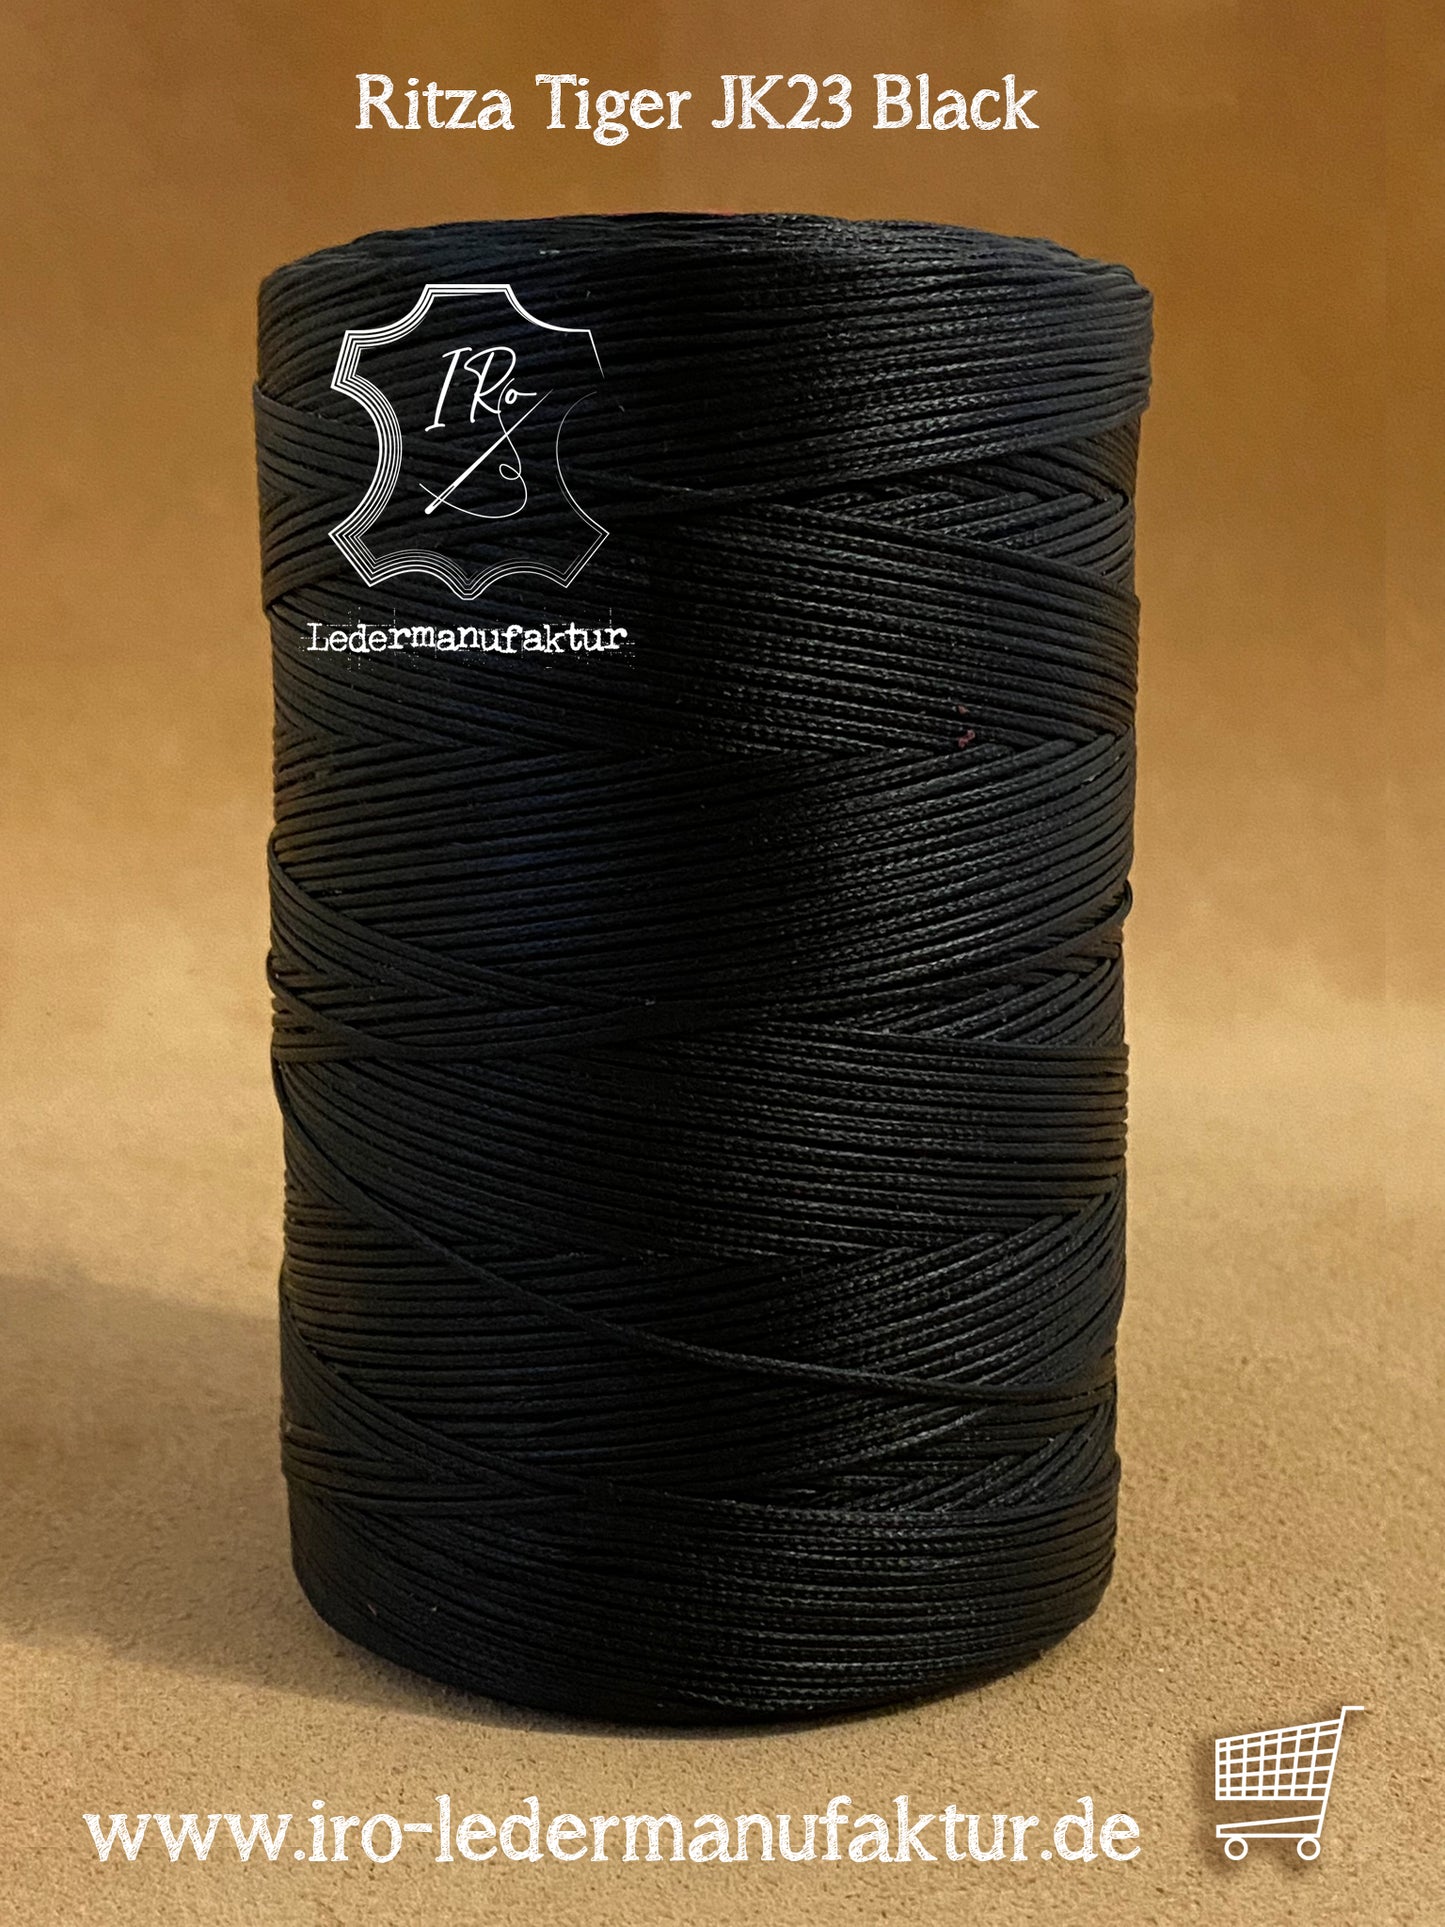 0,6 mm Ritza 25 tiger 1000 m Spule | Sewing thread for leather, waxed. Hand stitch, hand sewing thread, flat shape